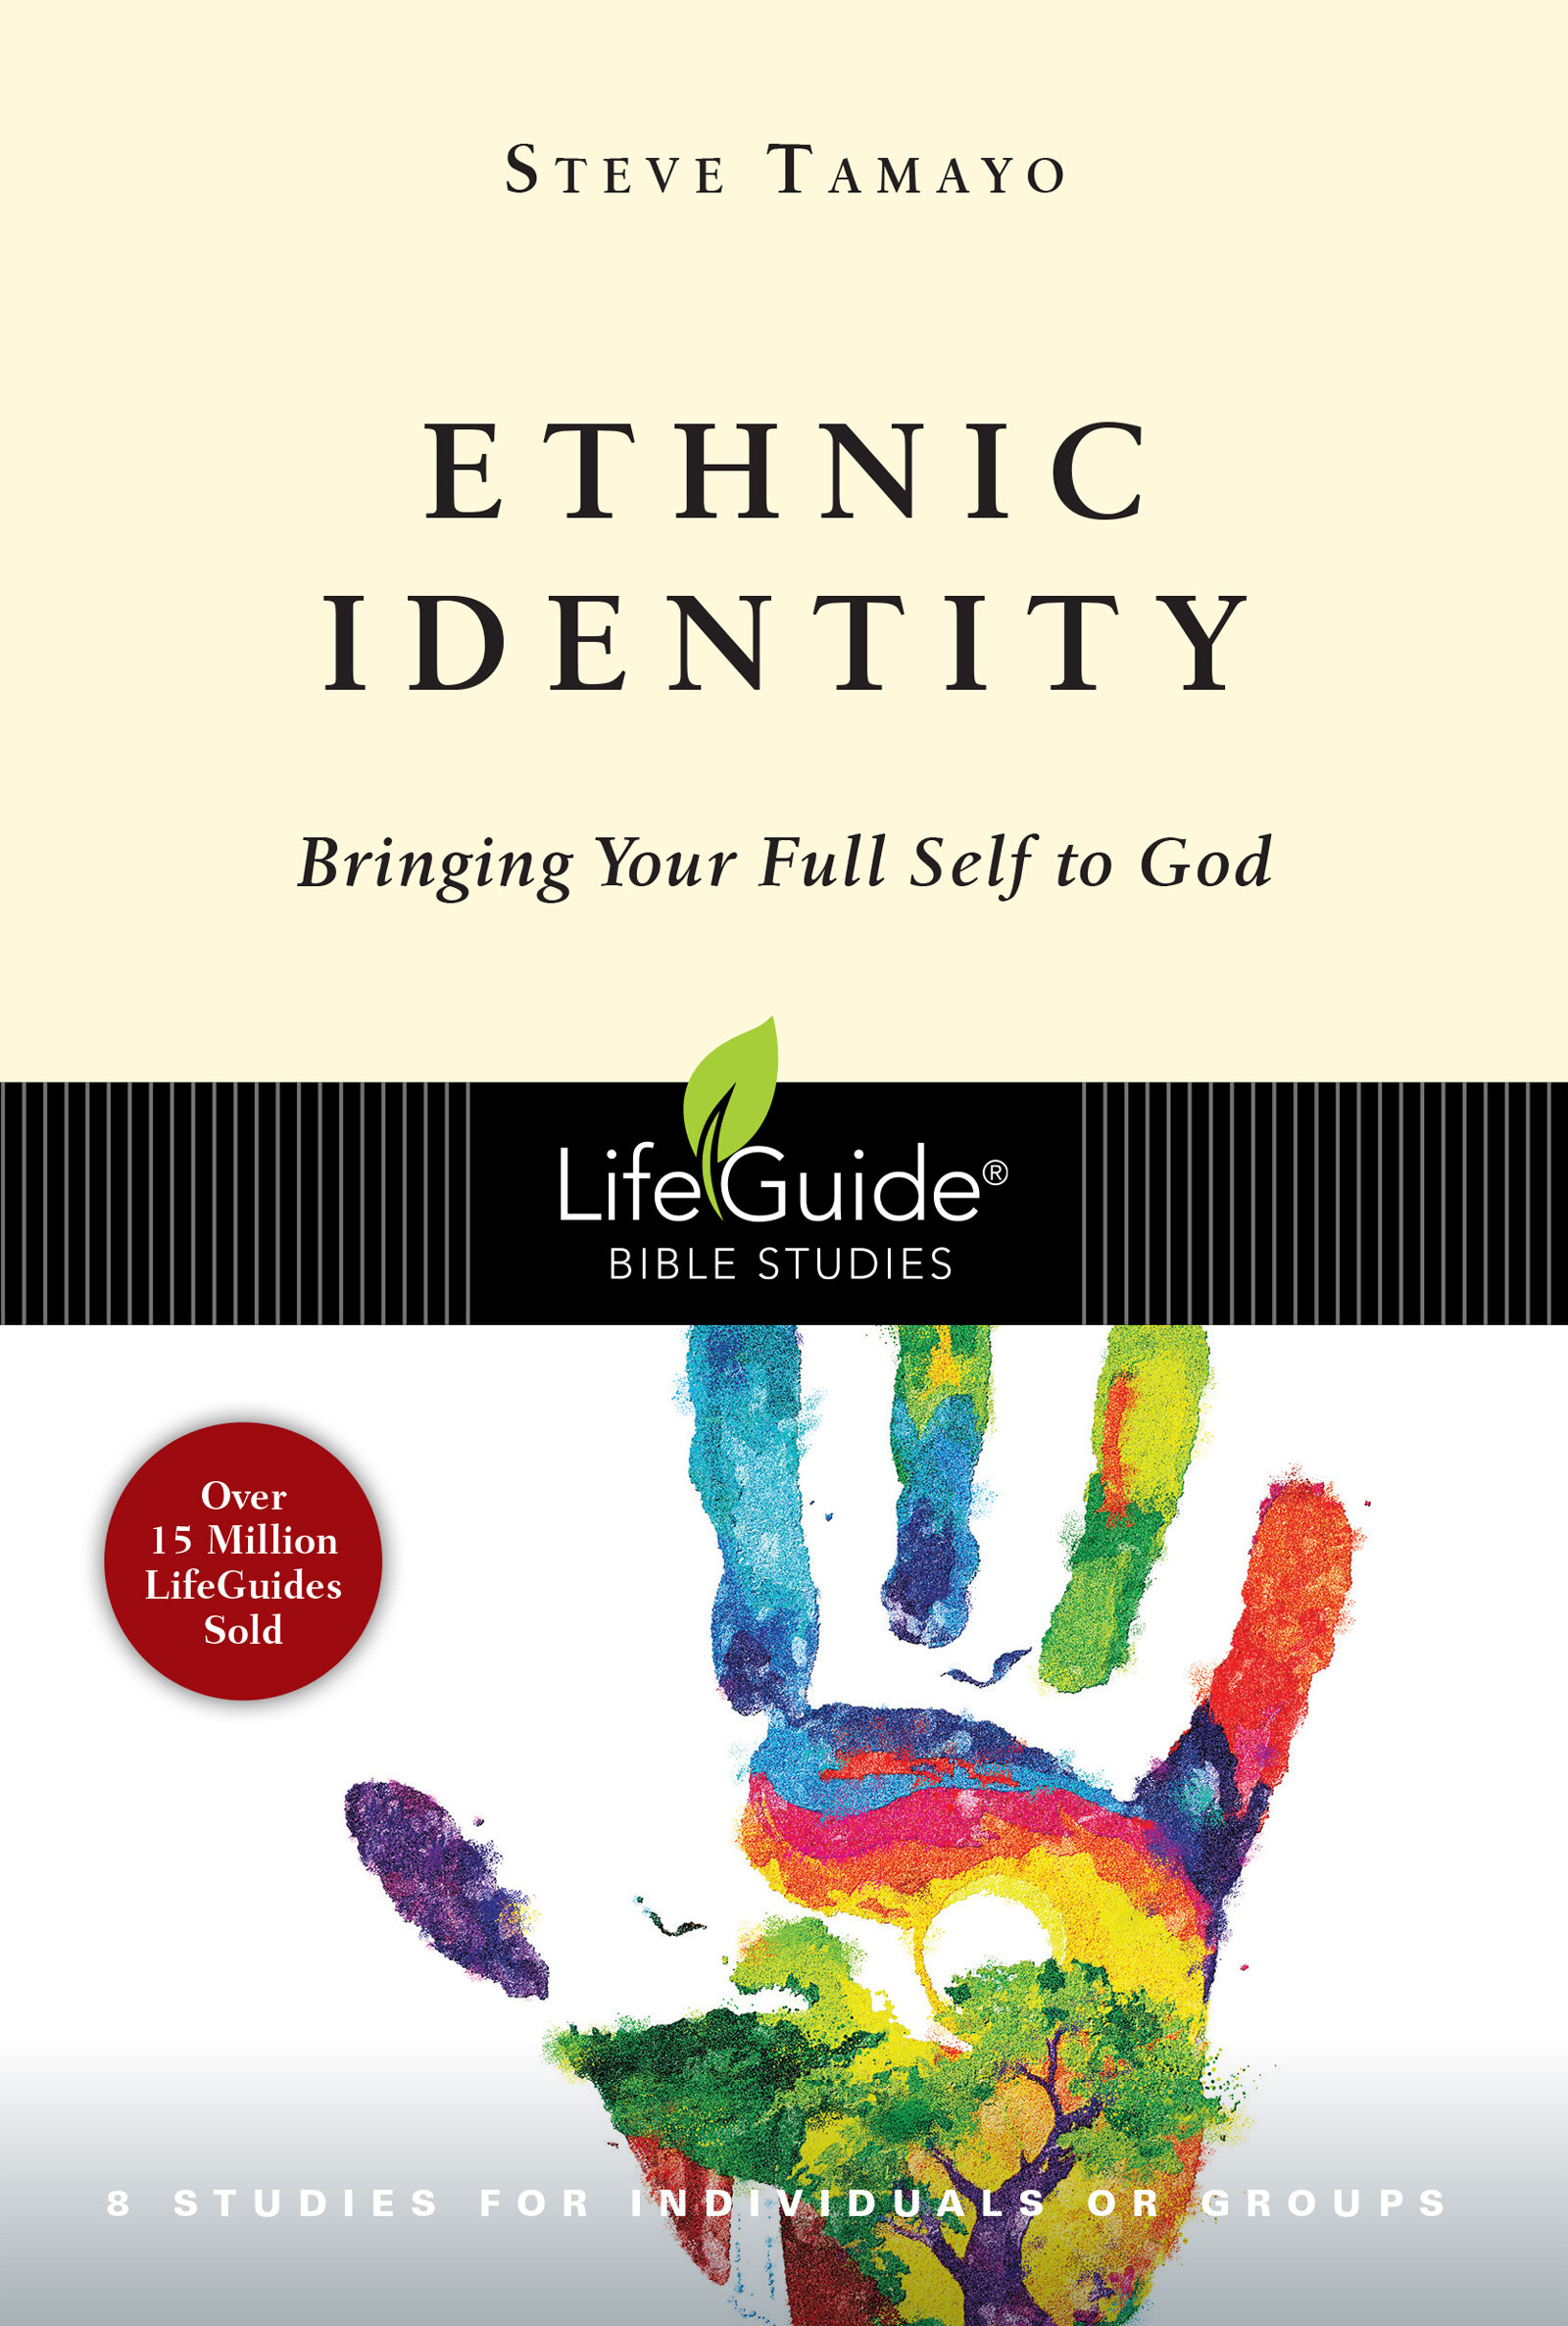 Ethnic Identity: Bringing Your Full Self to God (LifeGuide Bible Studies)